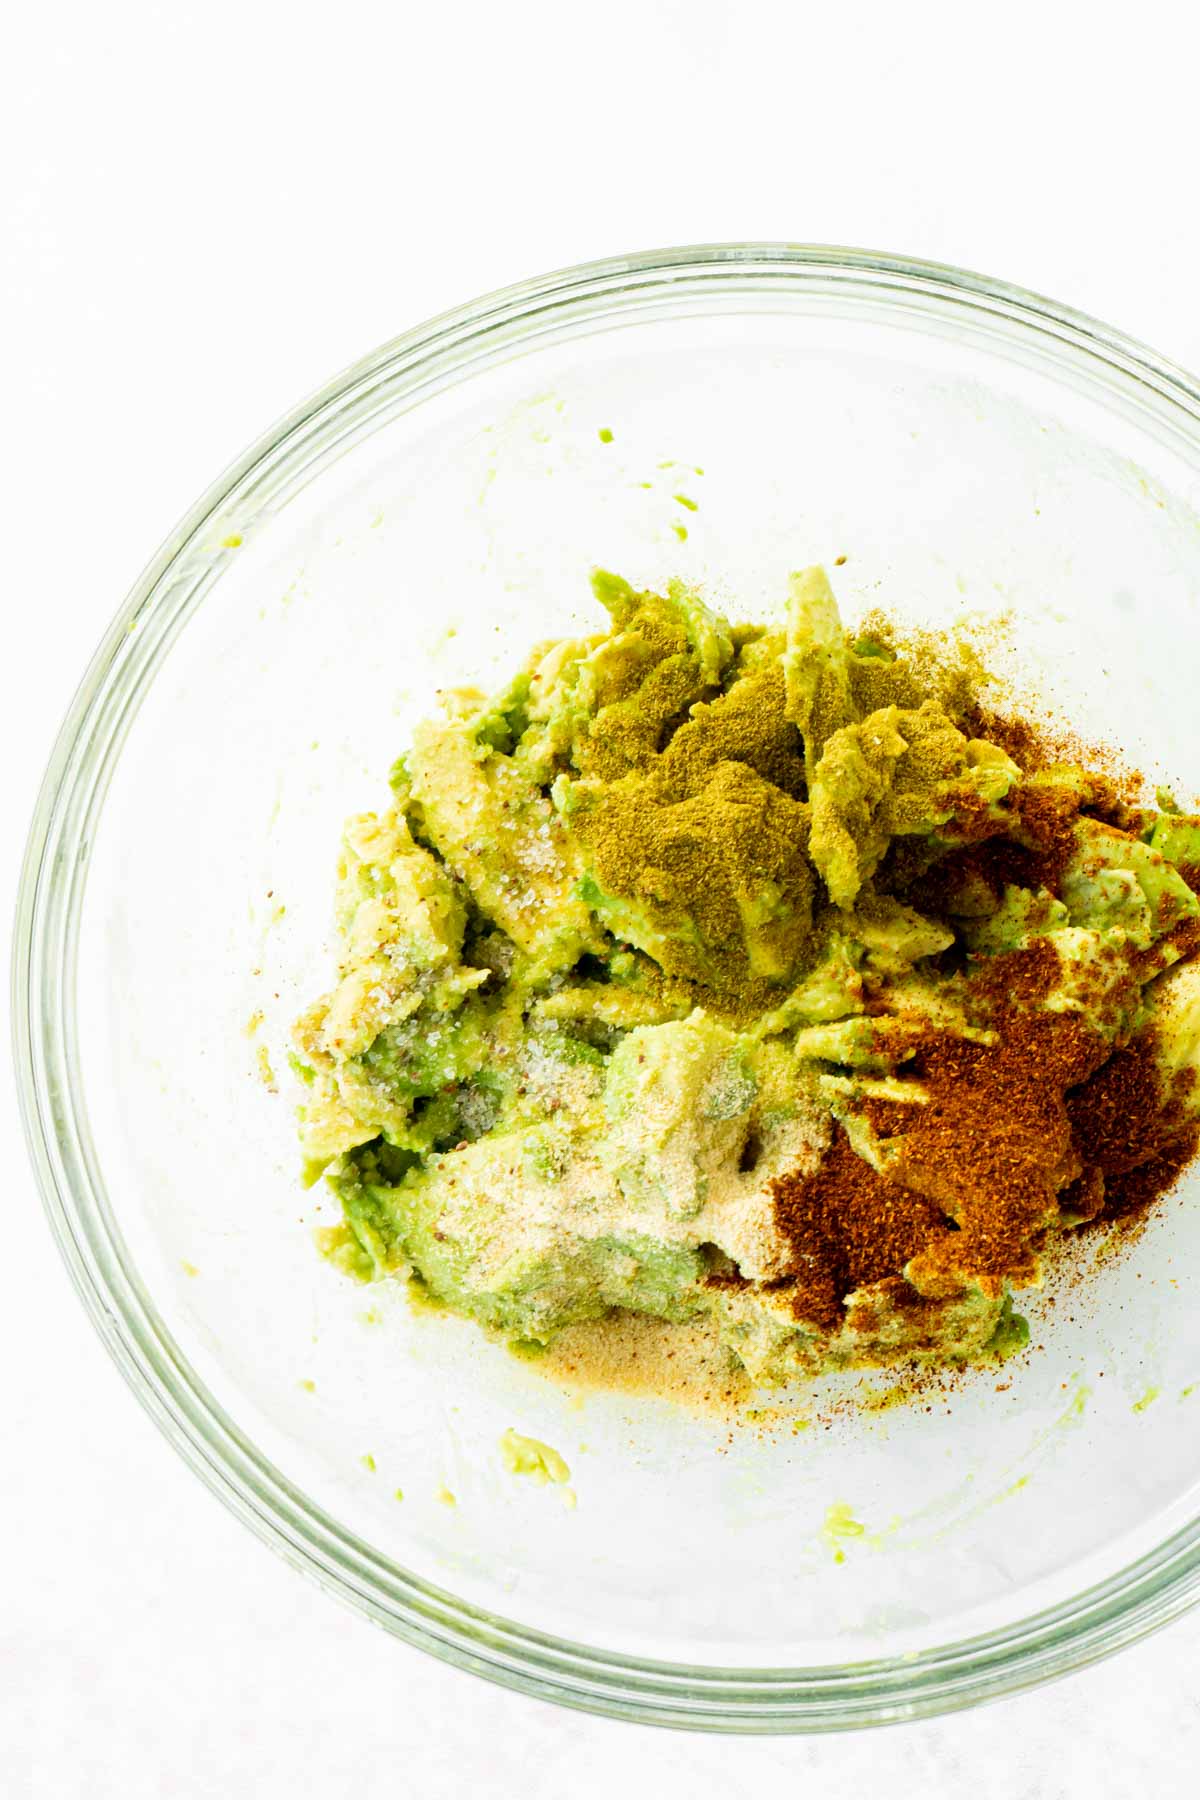 Avocado and spices in a glass bowl